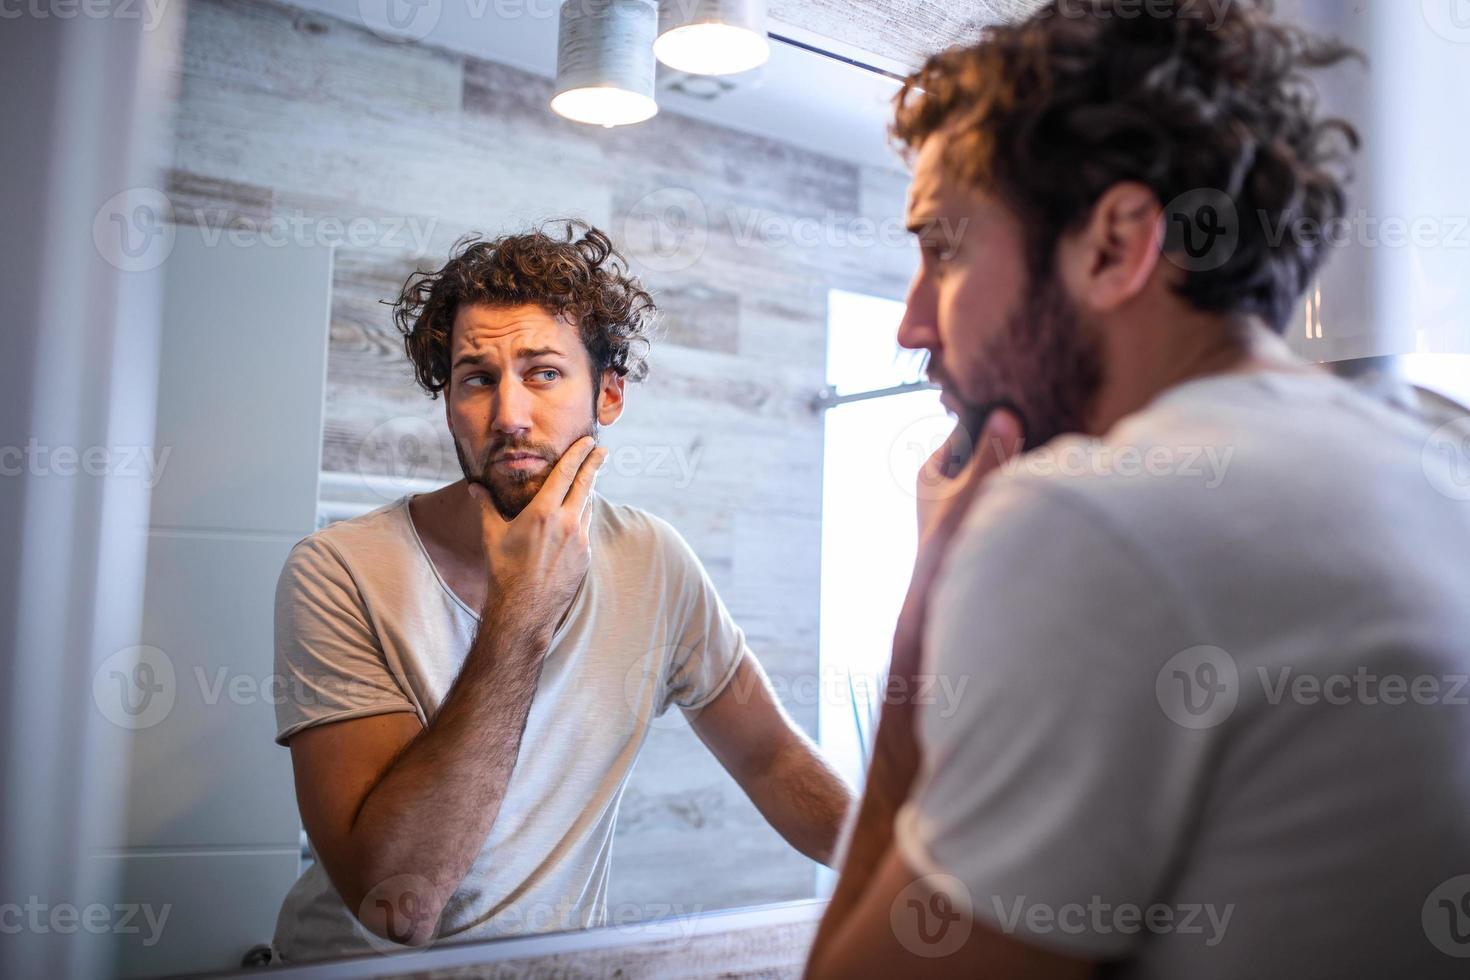 Morning hygiene, Handsome man in the bathroom looking in mirror. Reflection of handsome man with beard looking at mirror and touching face in bathroom grooming photo